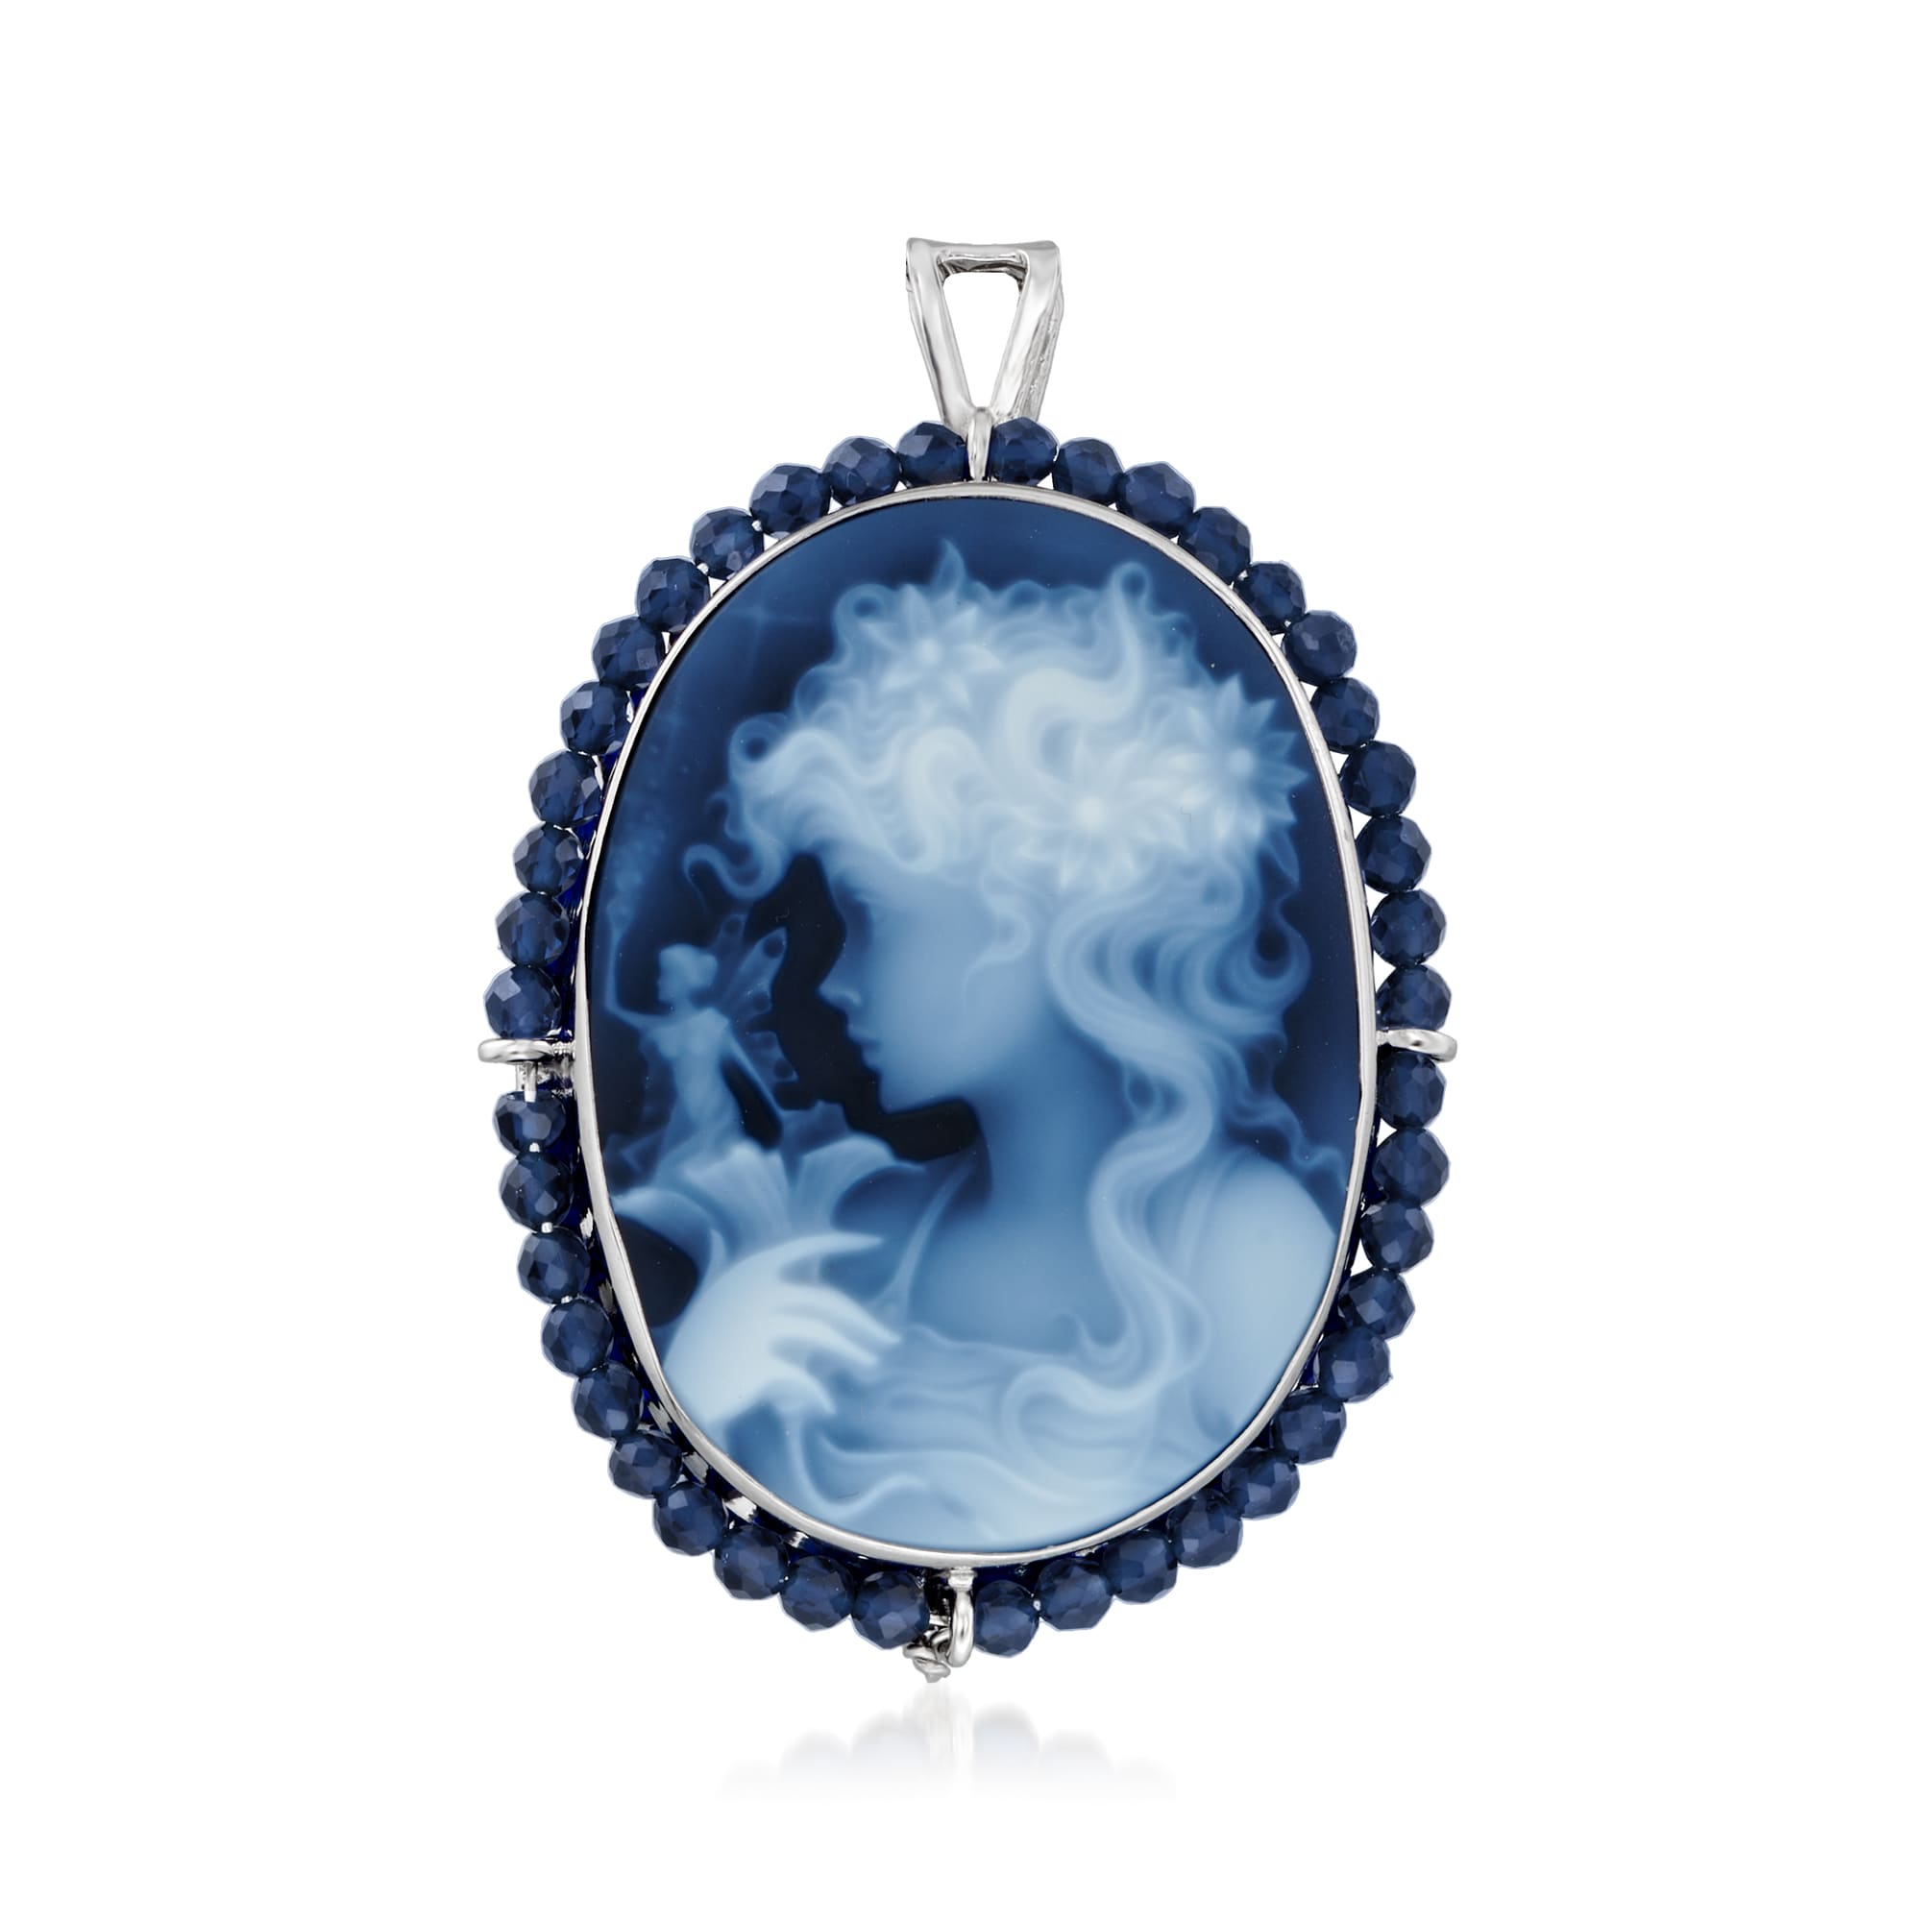 Hope lady blue cameo brooch silver